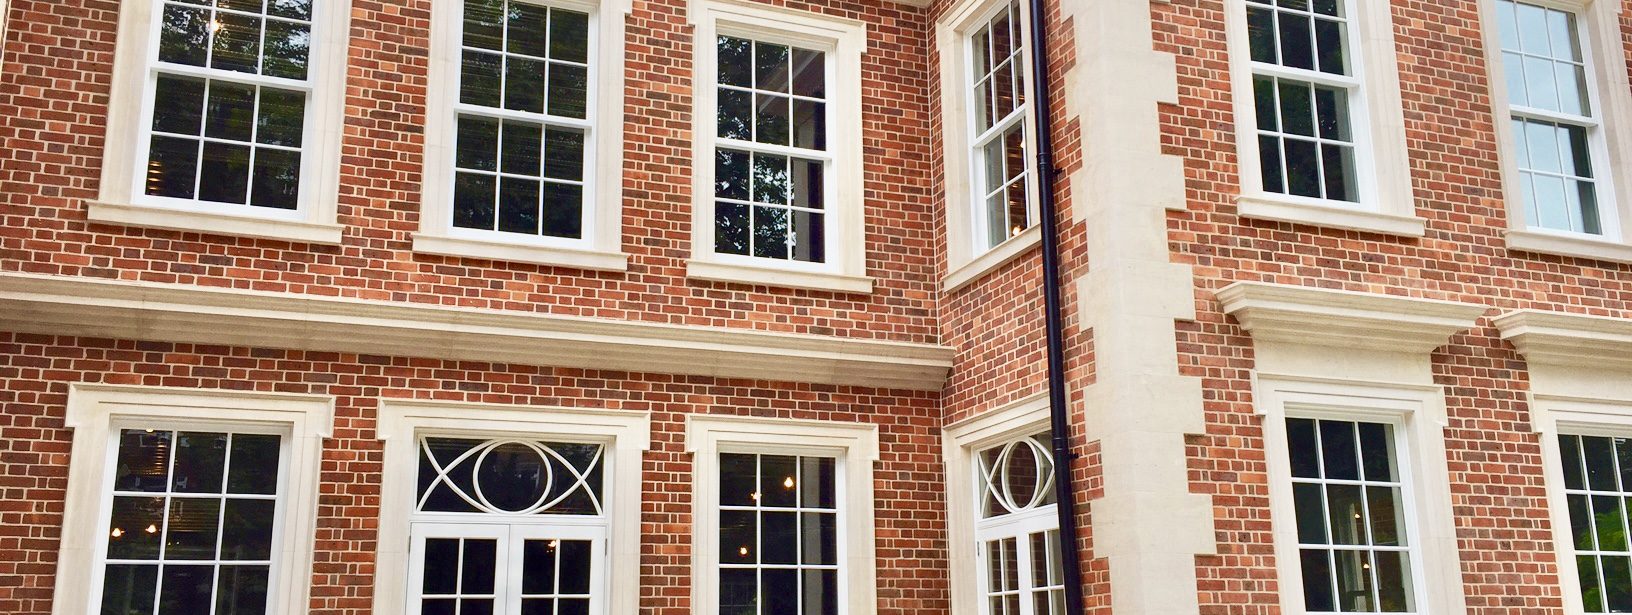 Ultimate Performance Windows: Triple Glazed and Vacuum Glazed Sash and Casement Windows from TRC Contracts